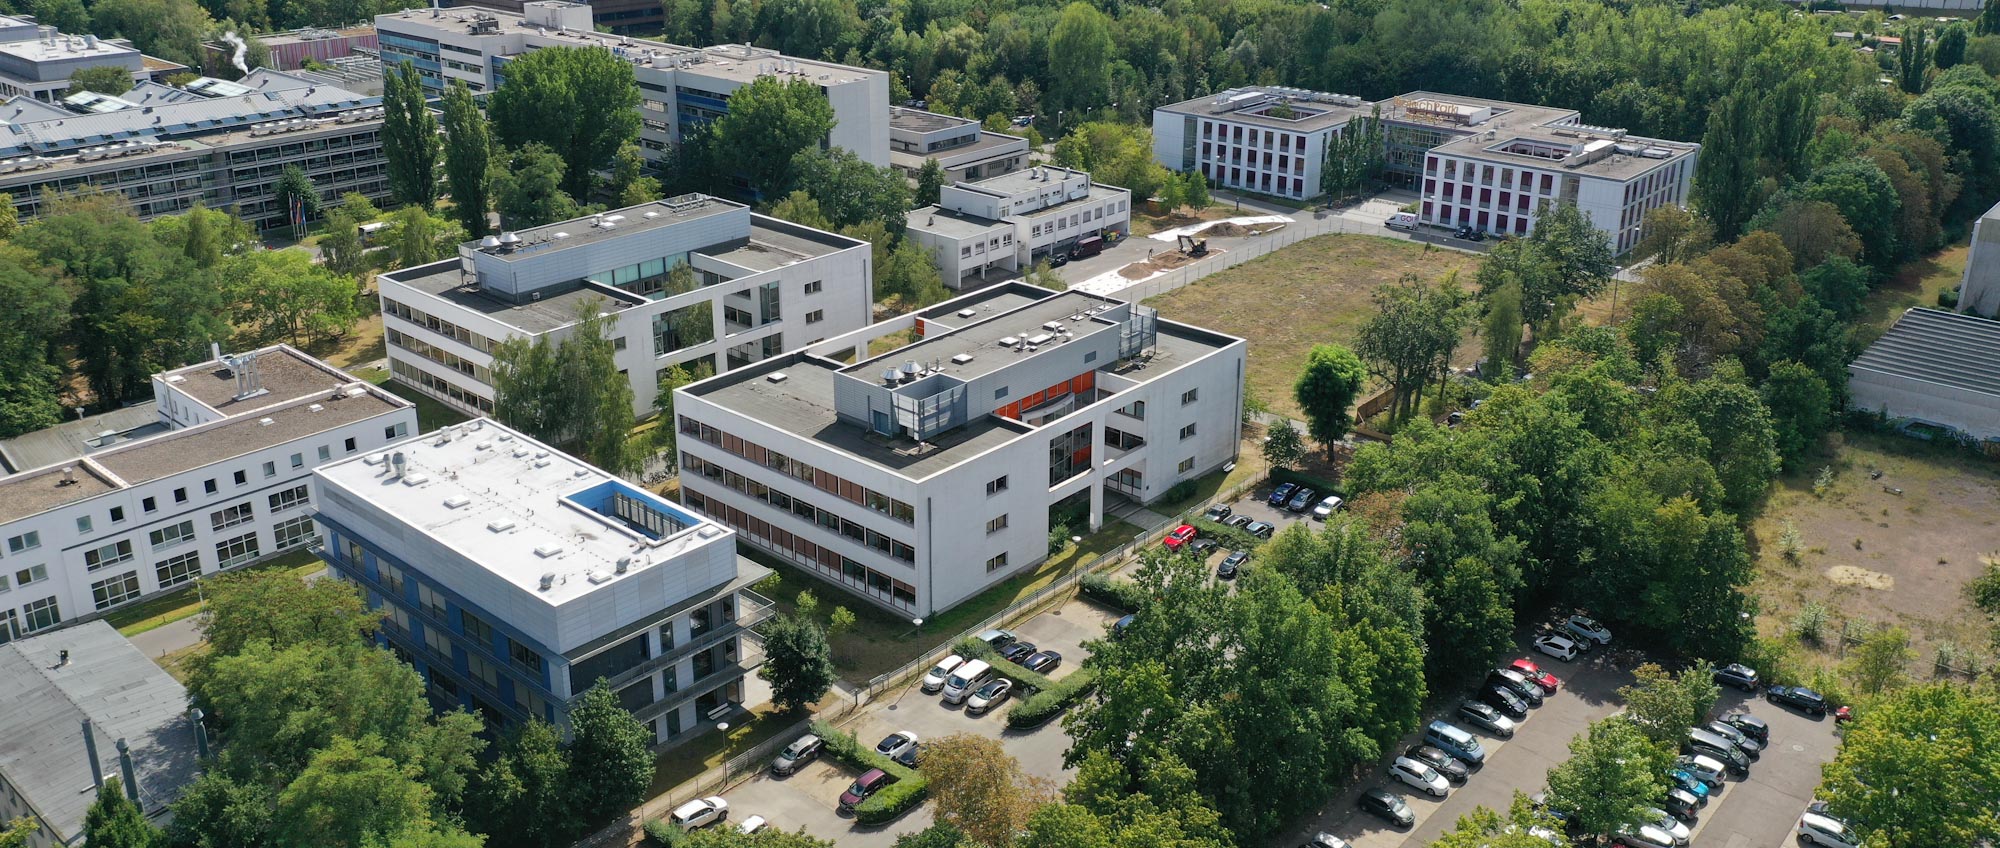 Aerial view of the Biotechpark with the houses D85, D79, D80 and D82